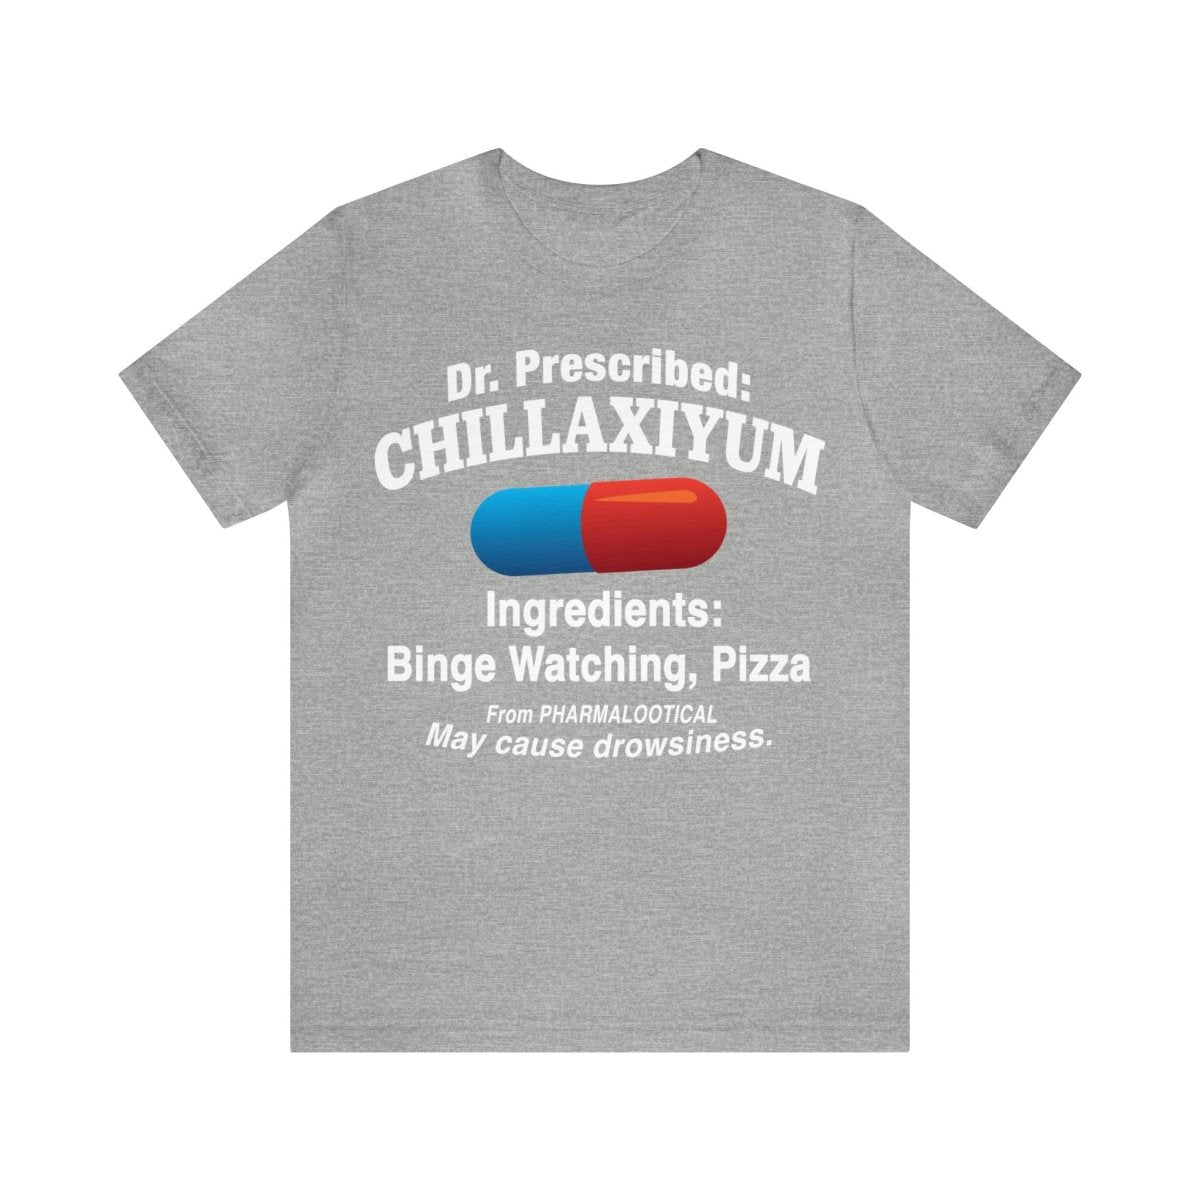 Chillaxiyum Premium T-Shirt, Dr Prescribed Pill, Binge Watching and Pizza Ingredients, May Cause Drowsiness, Relaxation, Weekend, Funny